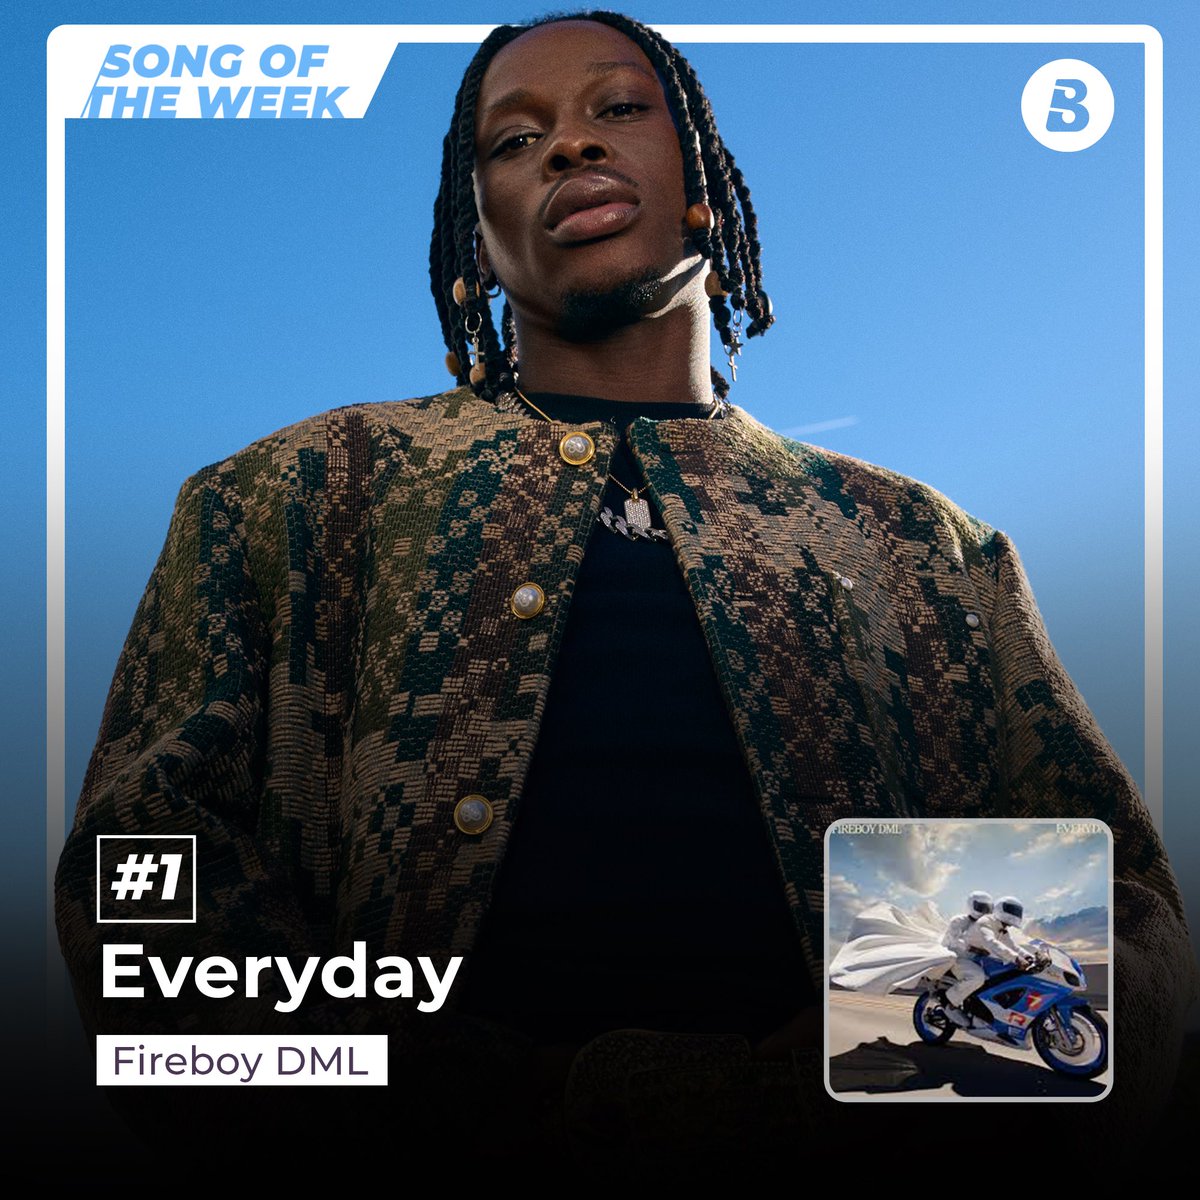 .@fireboydml's 'EVERYDAY' is the song of the week on Boomplay NG 🇳🇬 🔥🚀